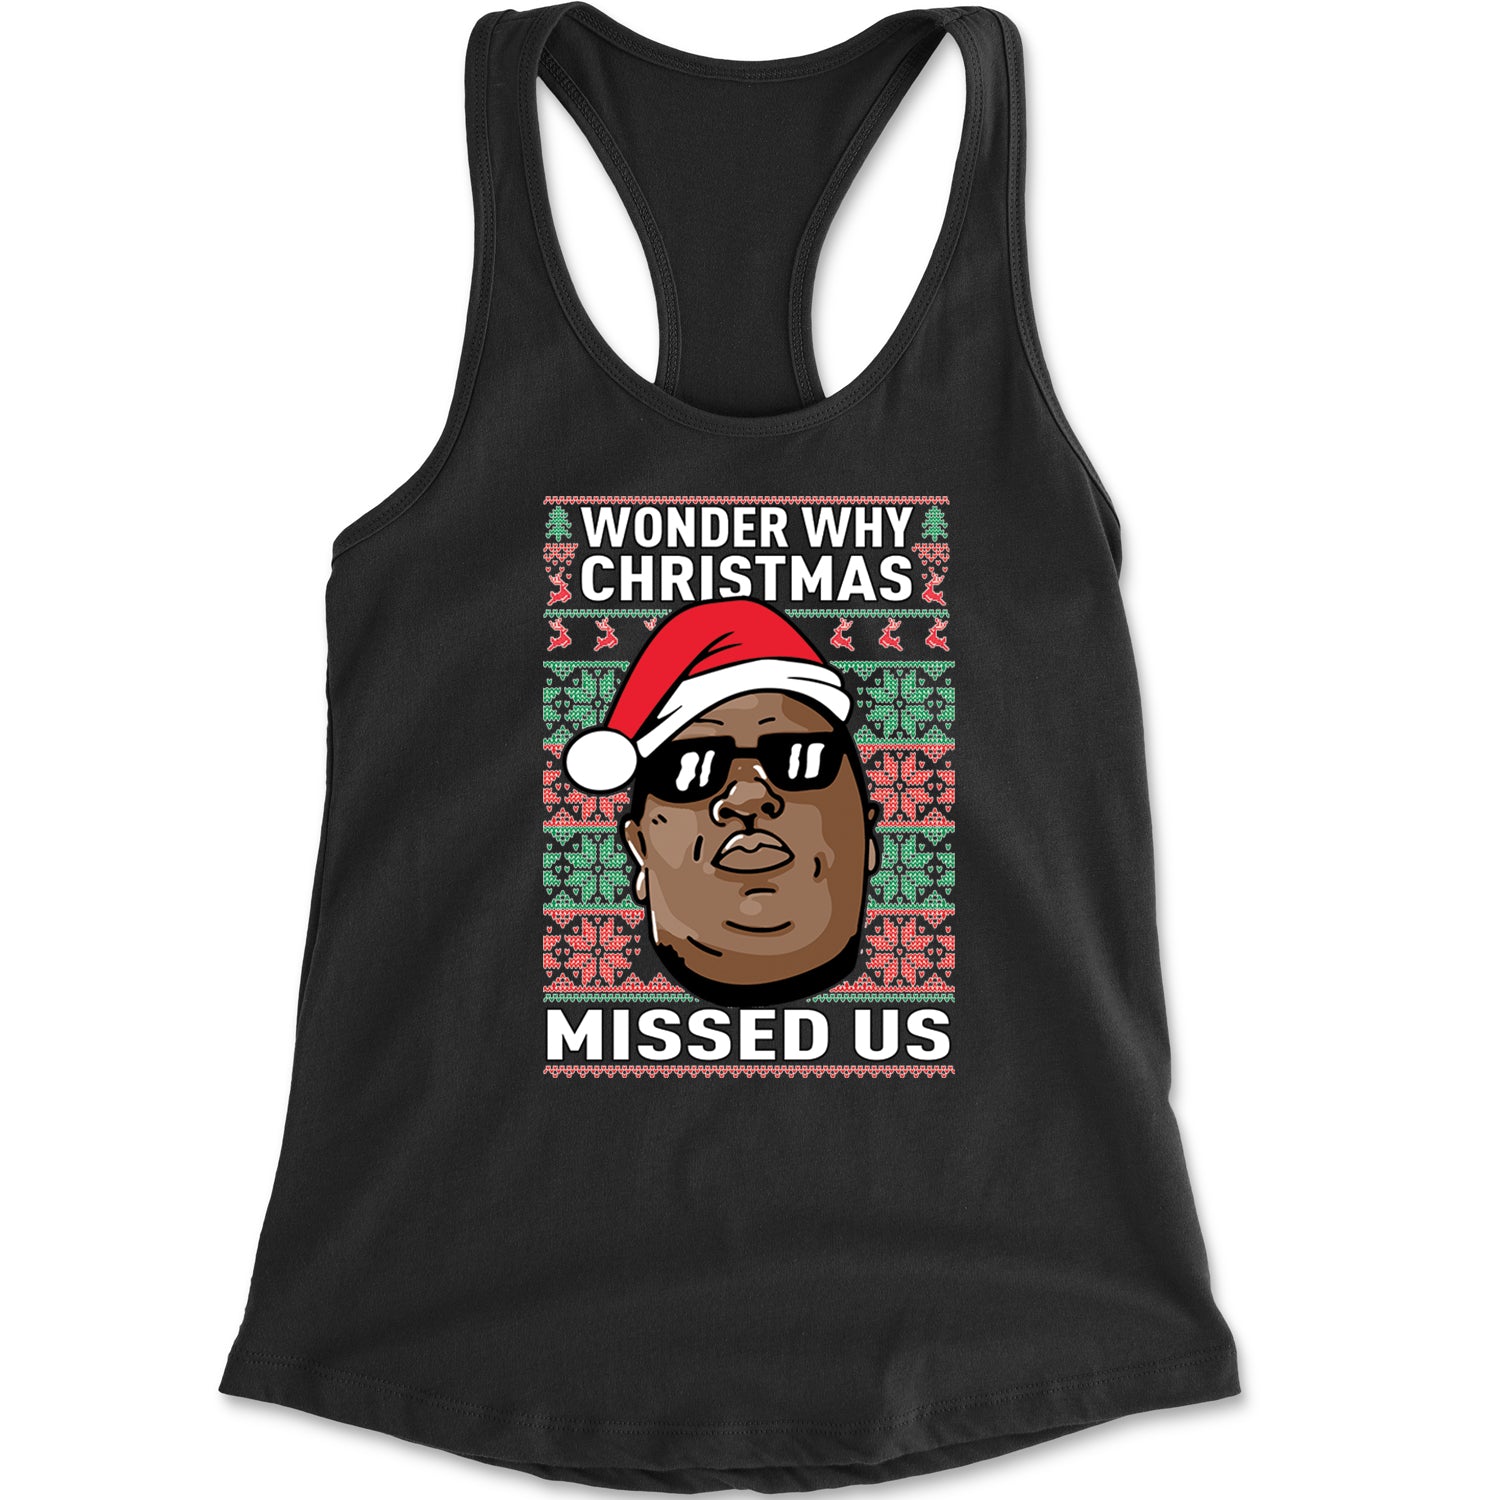 Wonder Why Christmas Missed Us Ugly Christmas Racerback Tank Top for Women